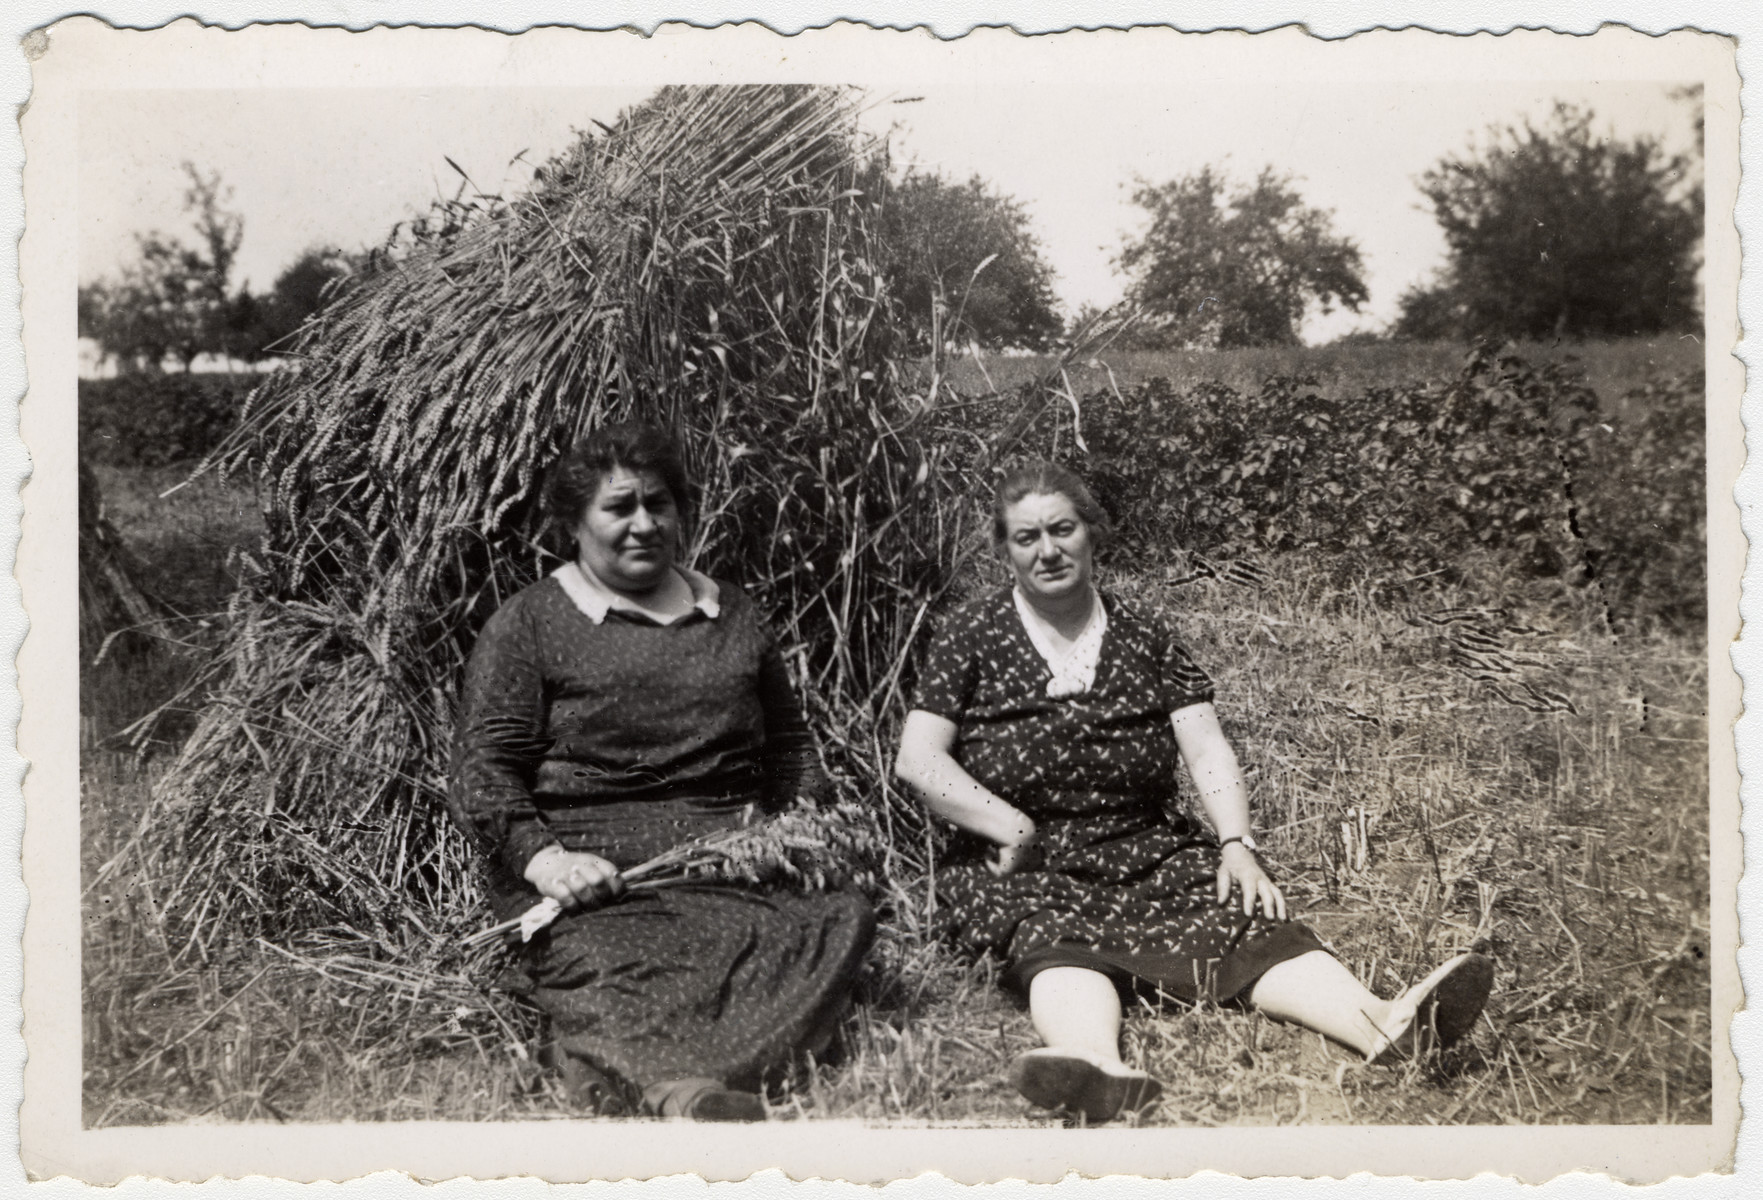 Two Alscatian Jewish women sit in a field next to a haystack.

Jeanne Moskow (the mother of Henri Moskow) is seated on the right.